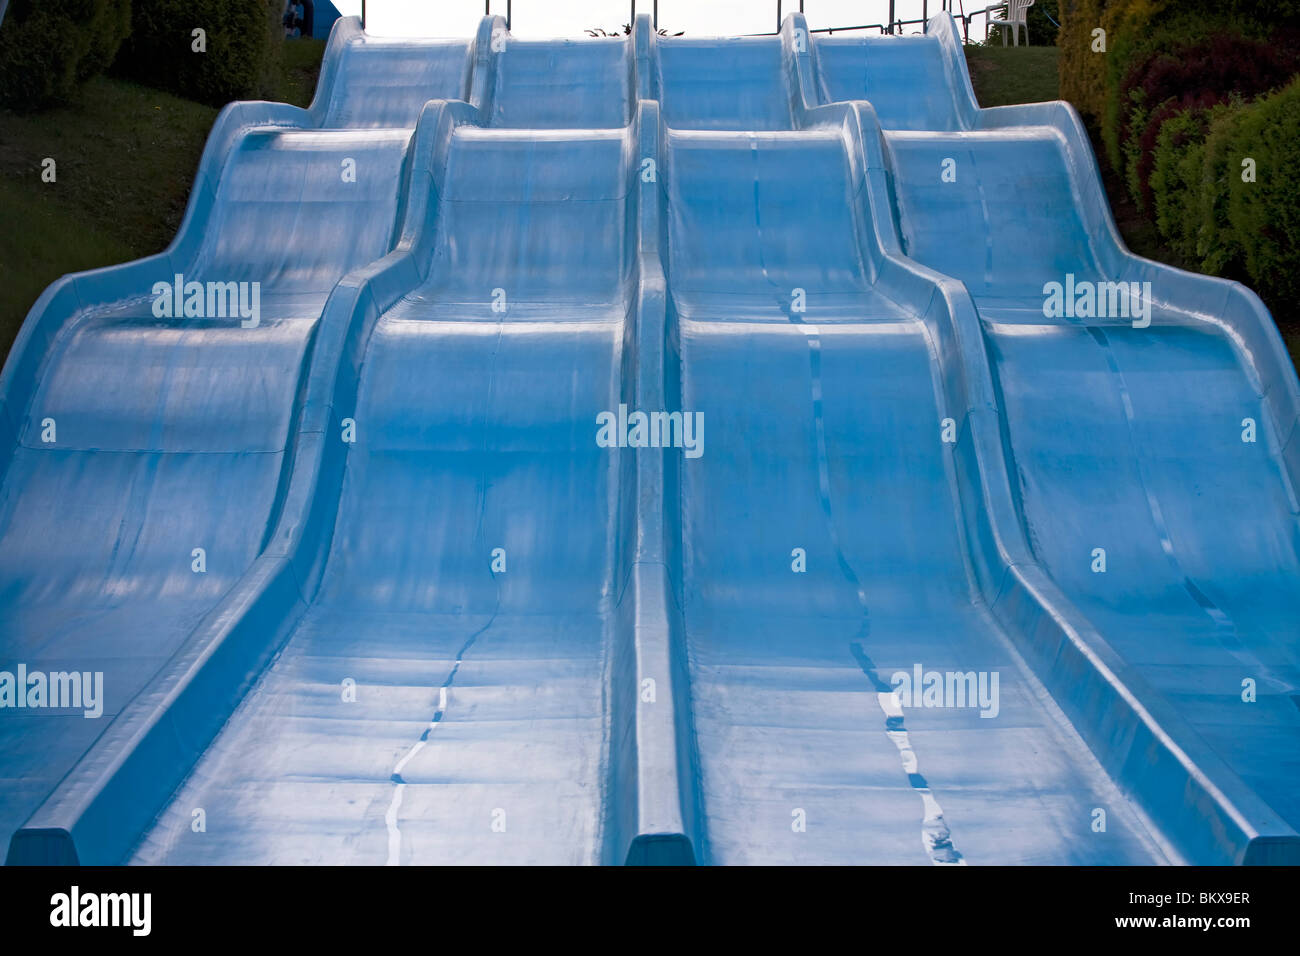 Four lanes wave water slide. Stock Photo